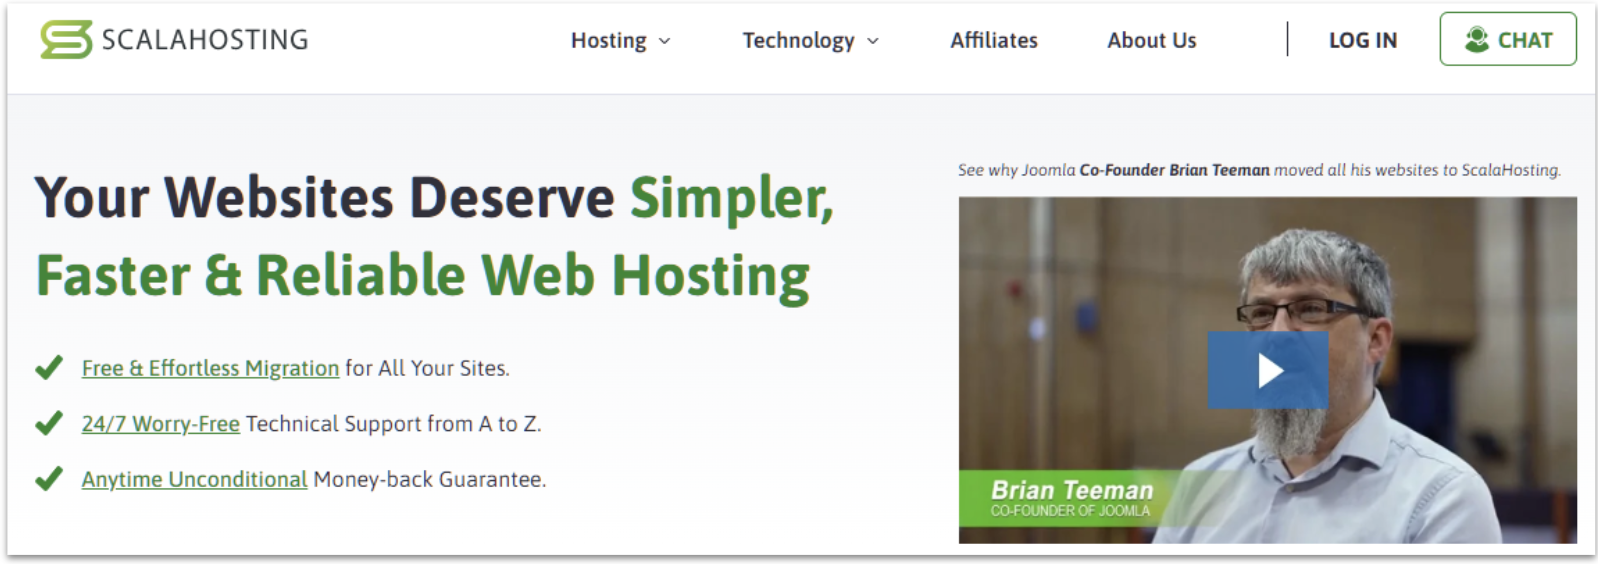 ScalaHosting home page